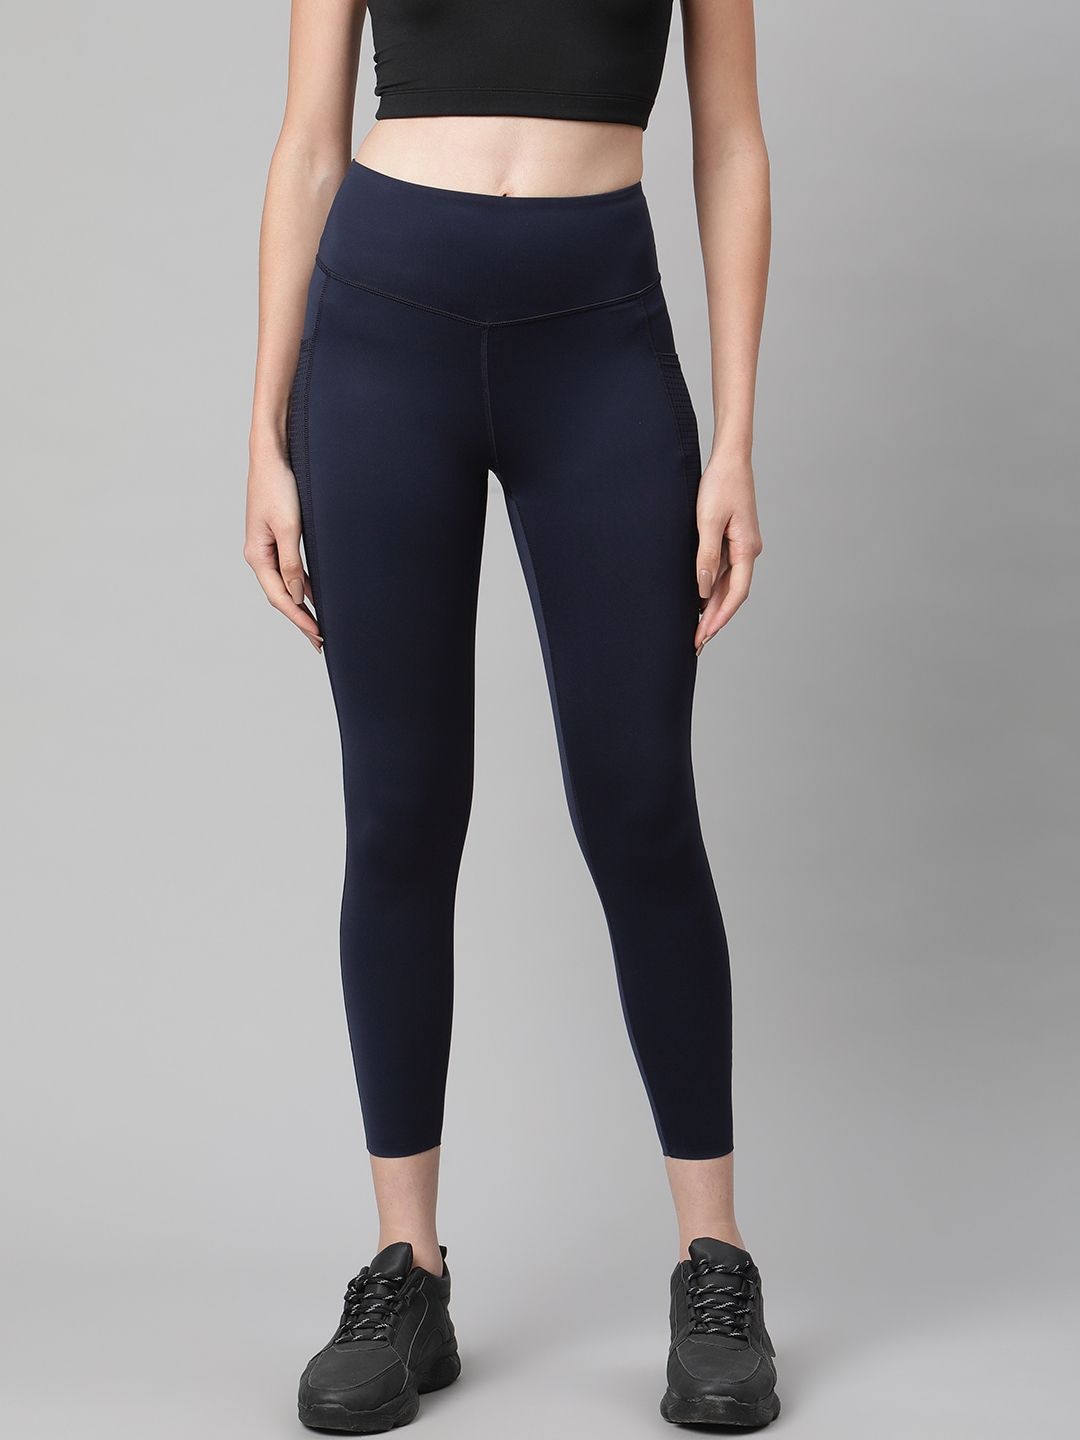 Marks & Spencer Women Navy Blue Solid Tights Price in India